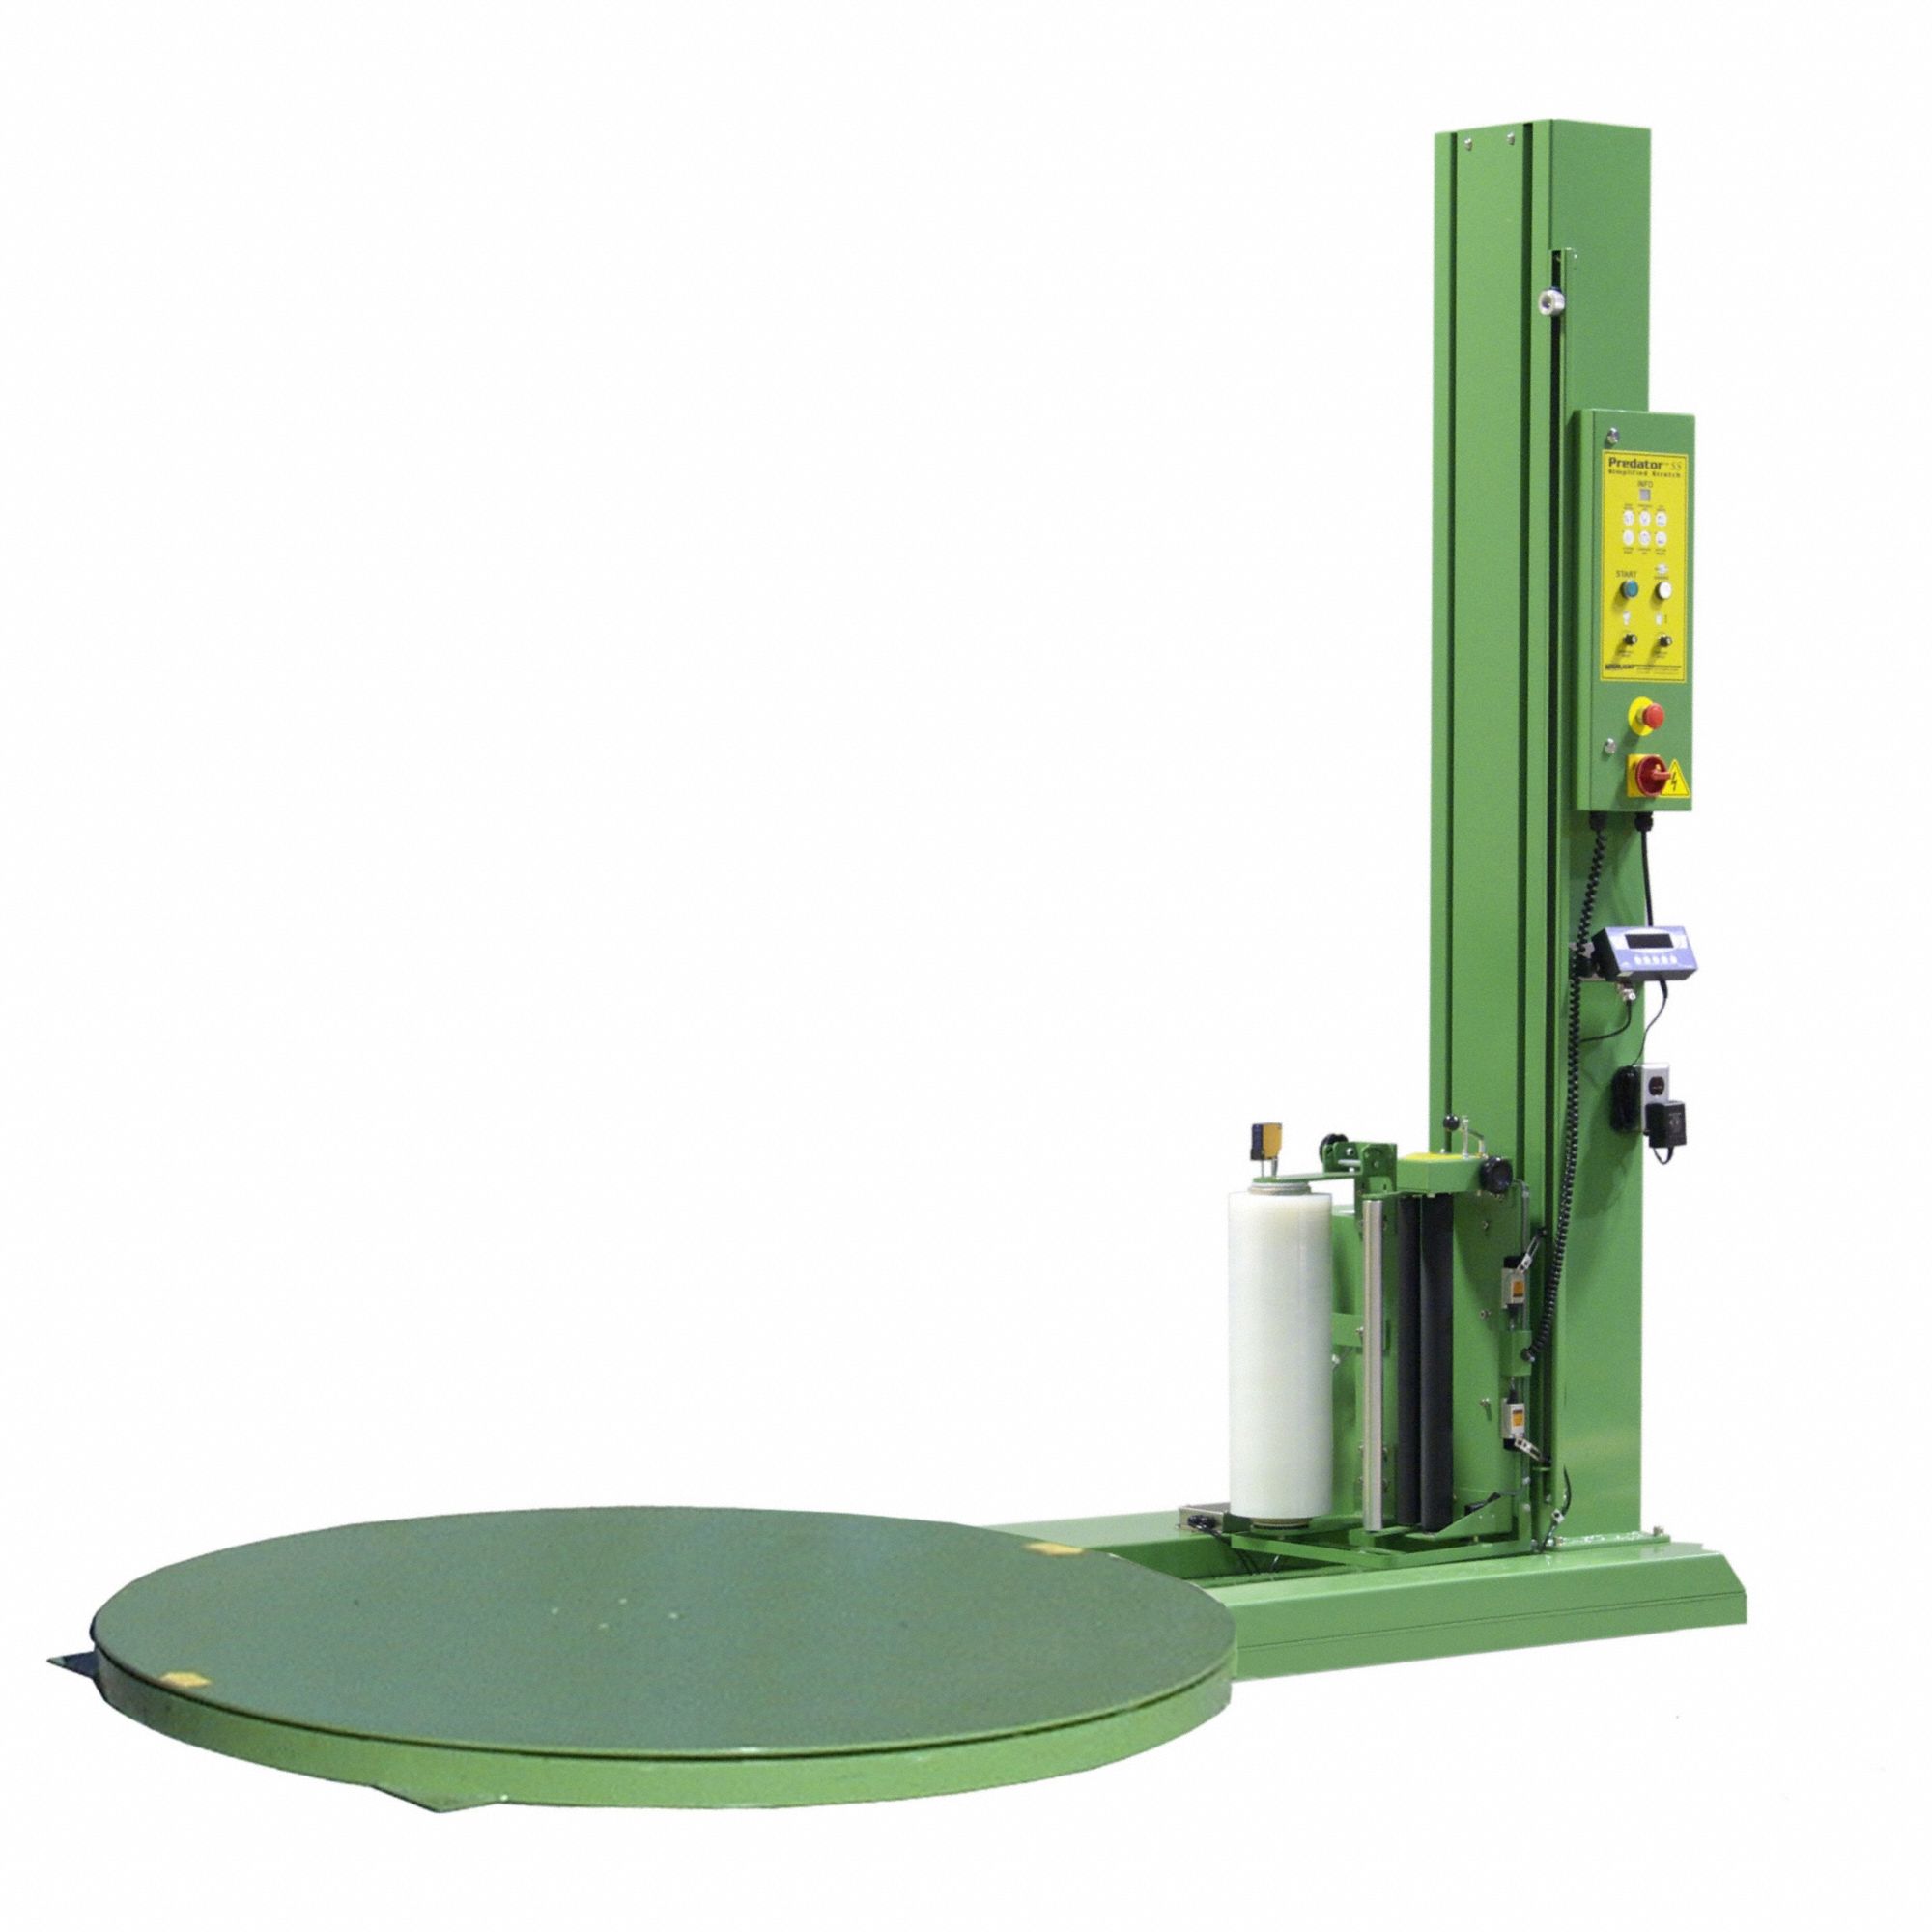 Stretch Wrap Machine: Stretch Wrap Machine, 20 to 25 Loads Wrapped per Hour